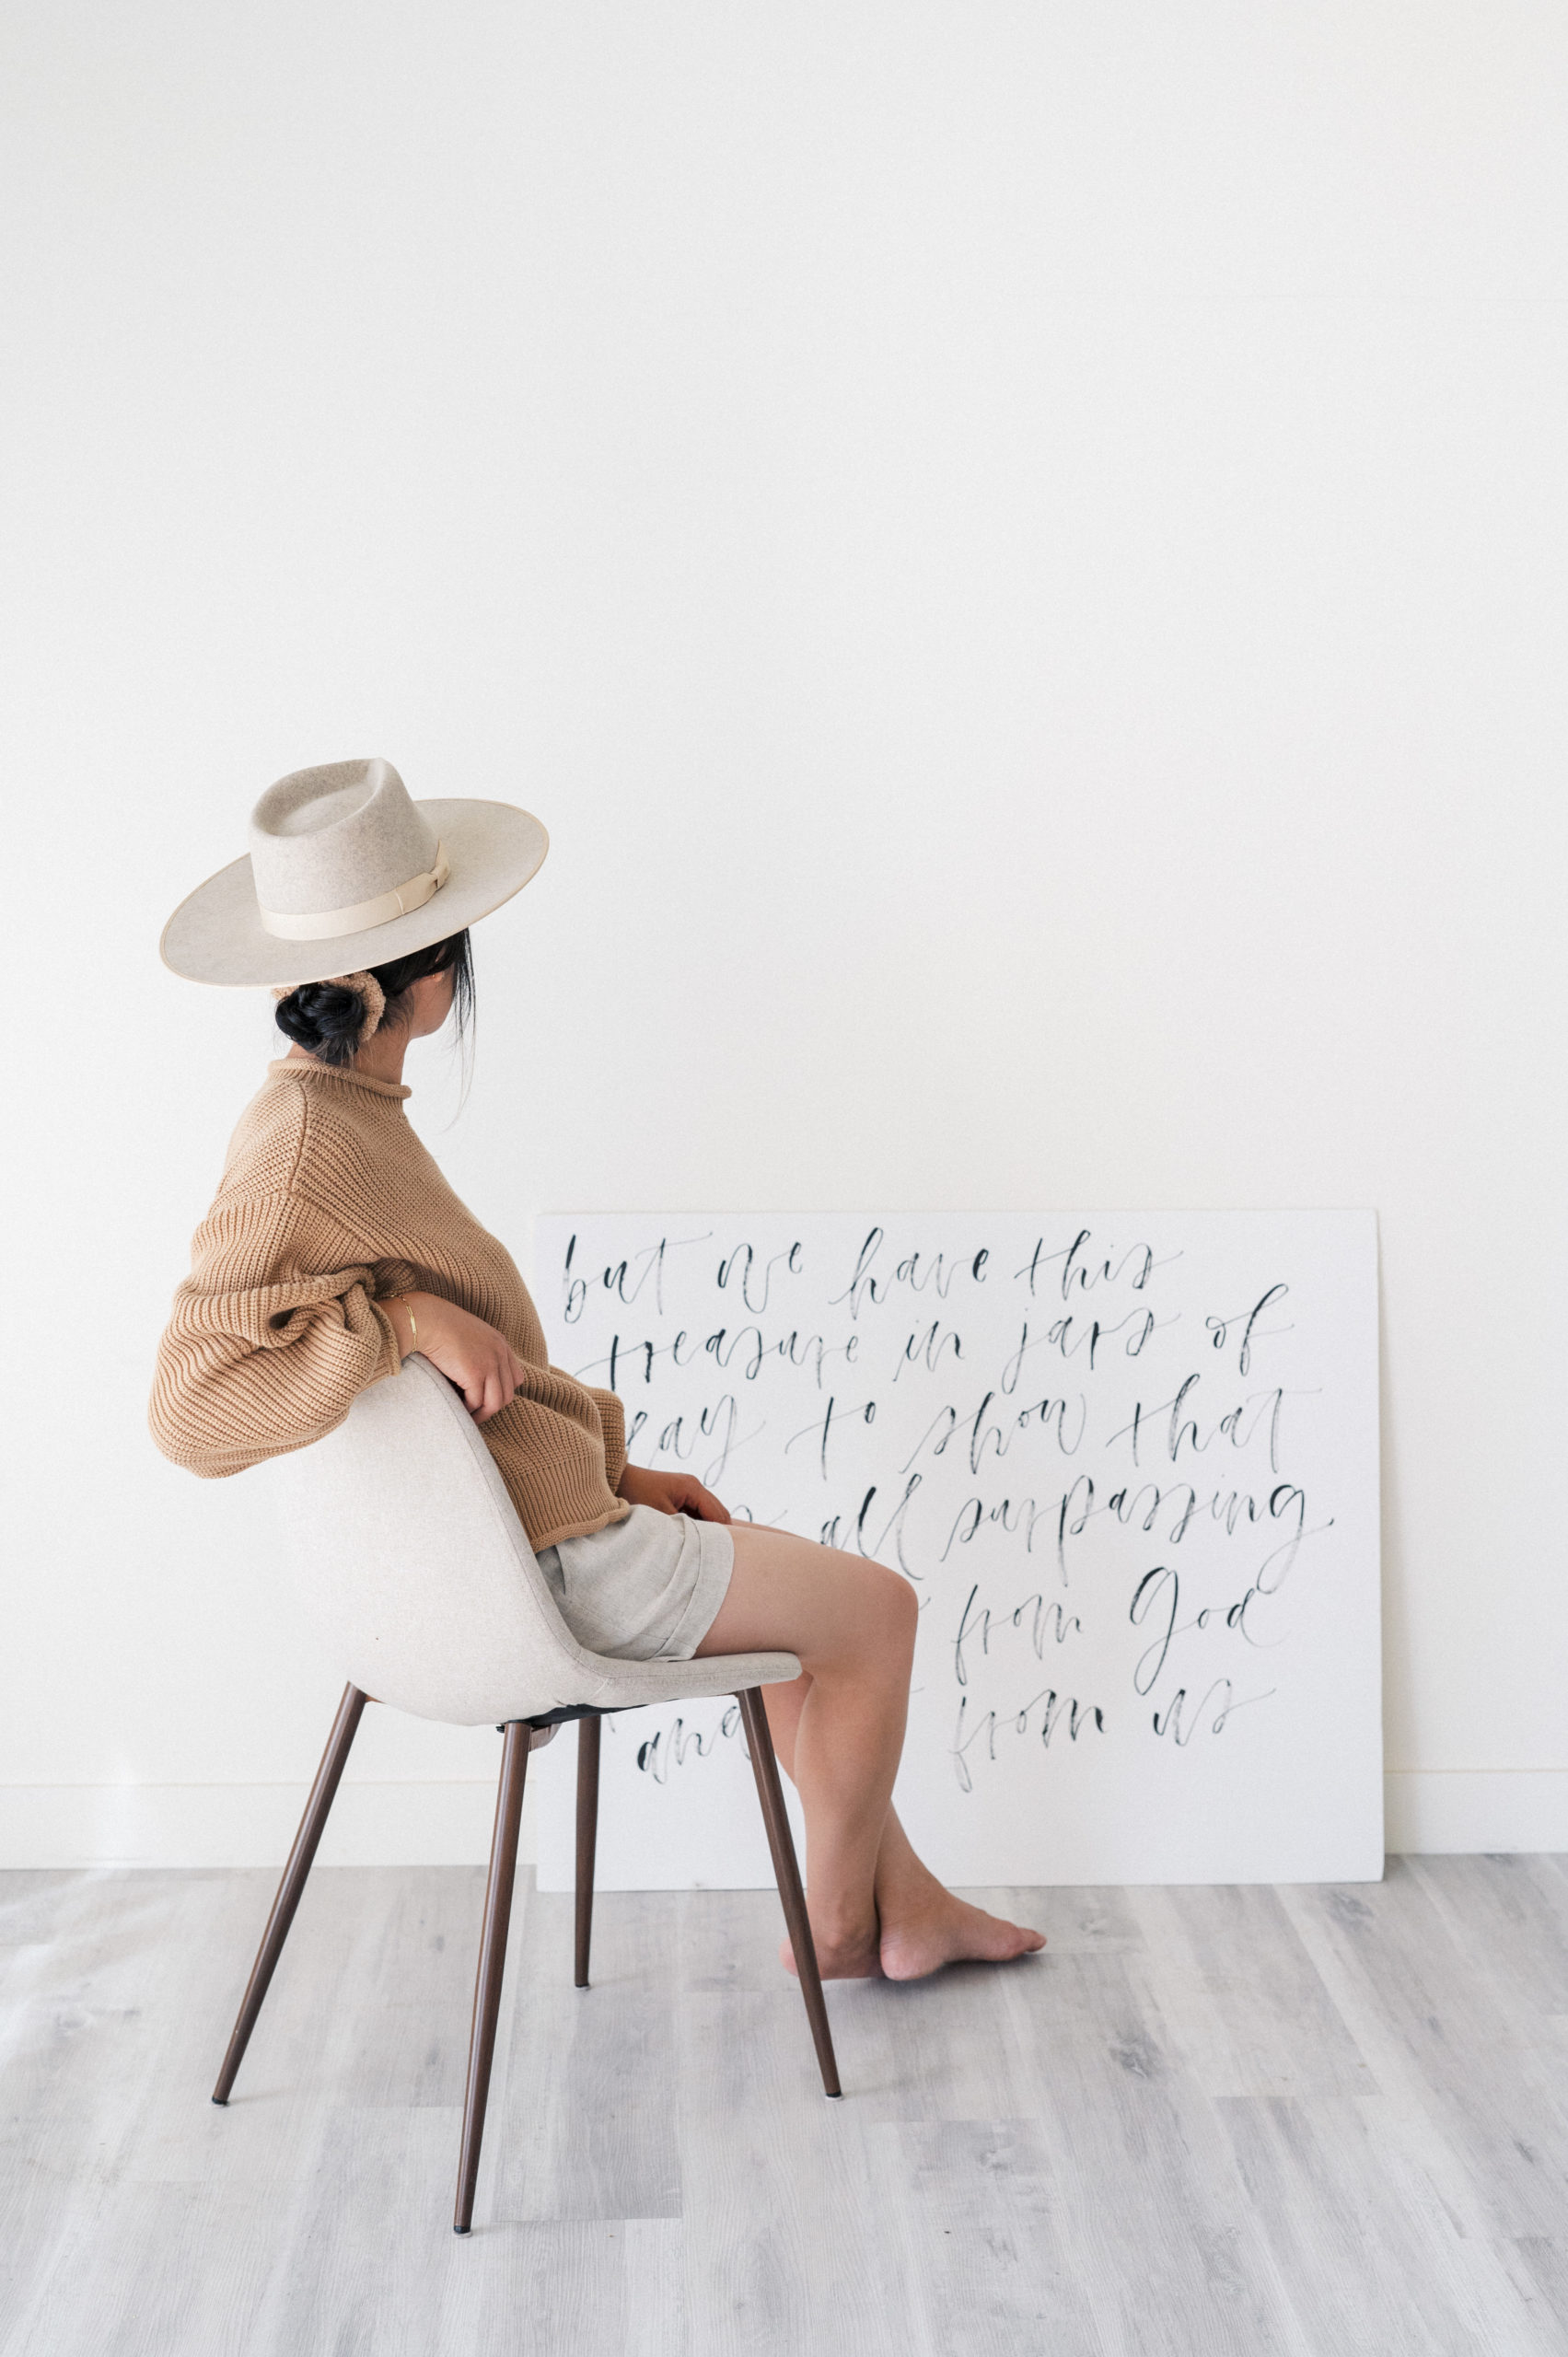 Edmonton Personal Branding Photography  Woman wearing brown sweater sitting in grey chair facing away sitting in front of white board with hand brushed calligraphy